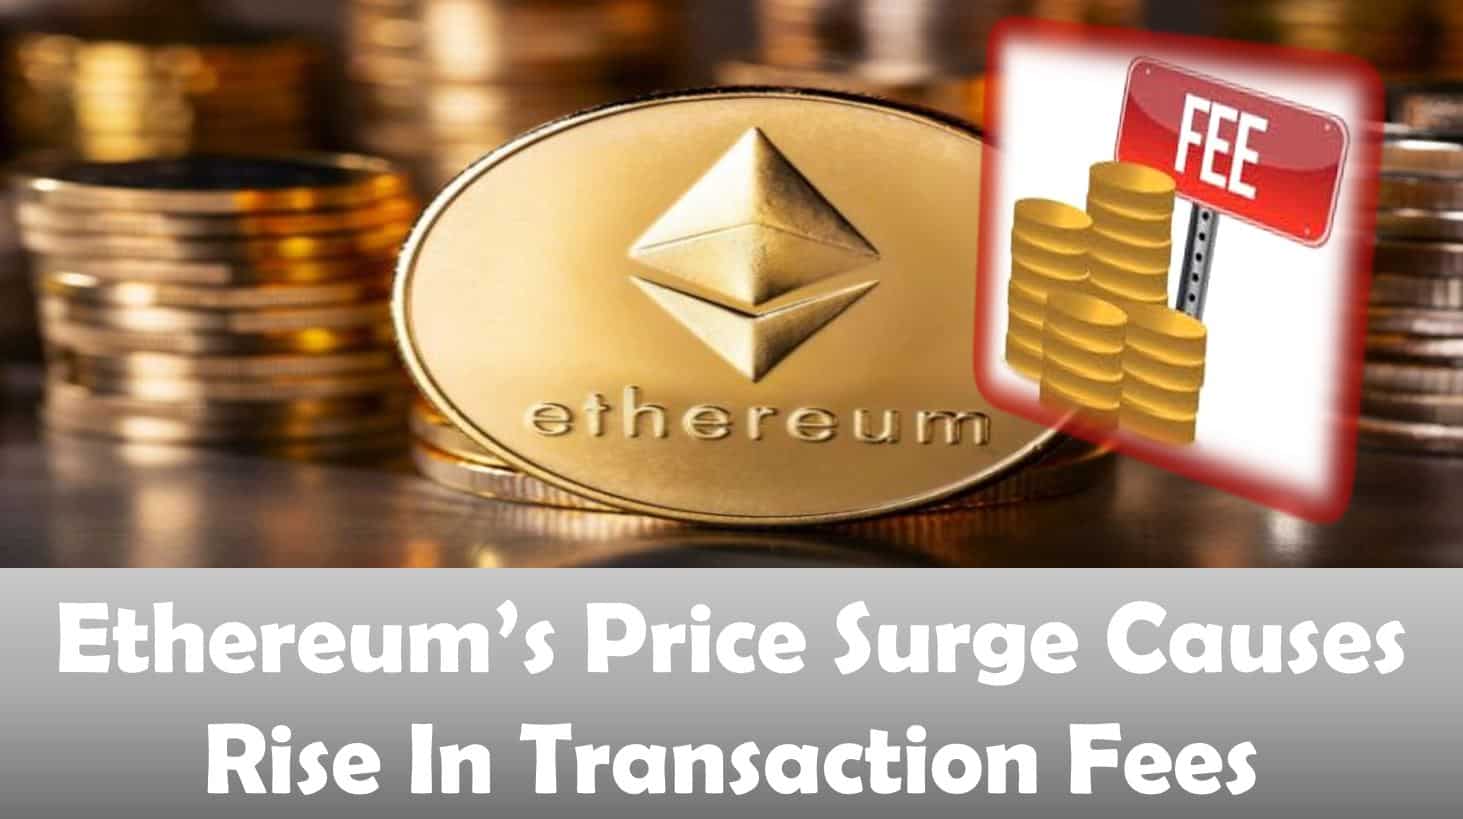 Ethereum’s Price Surge Causes Rise In Transaction Fees